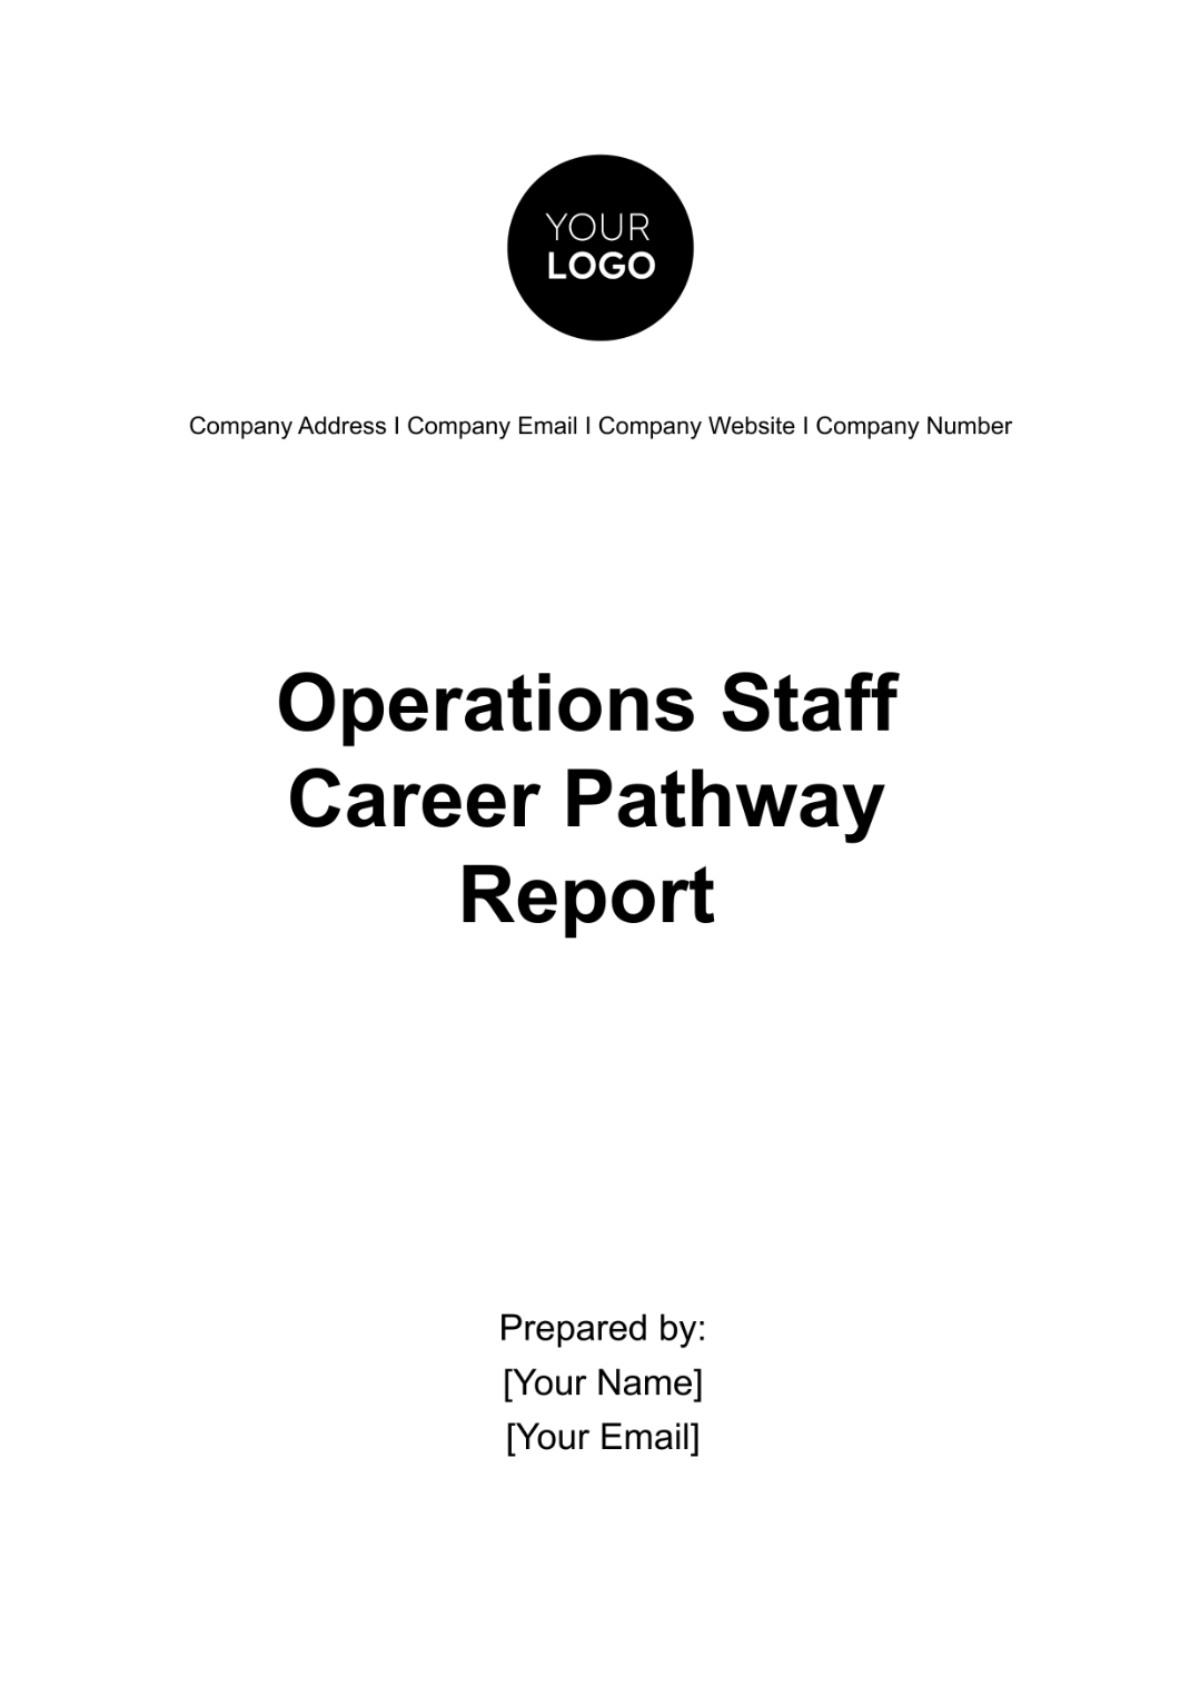 Operations Staff Career Pathway Report Template